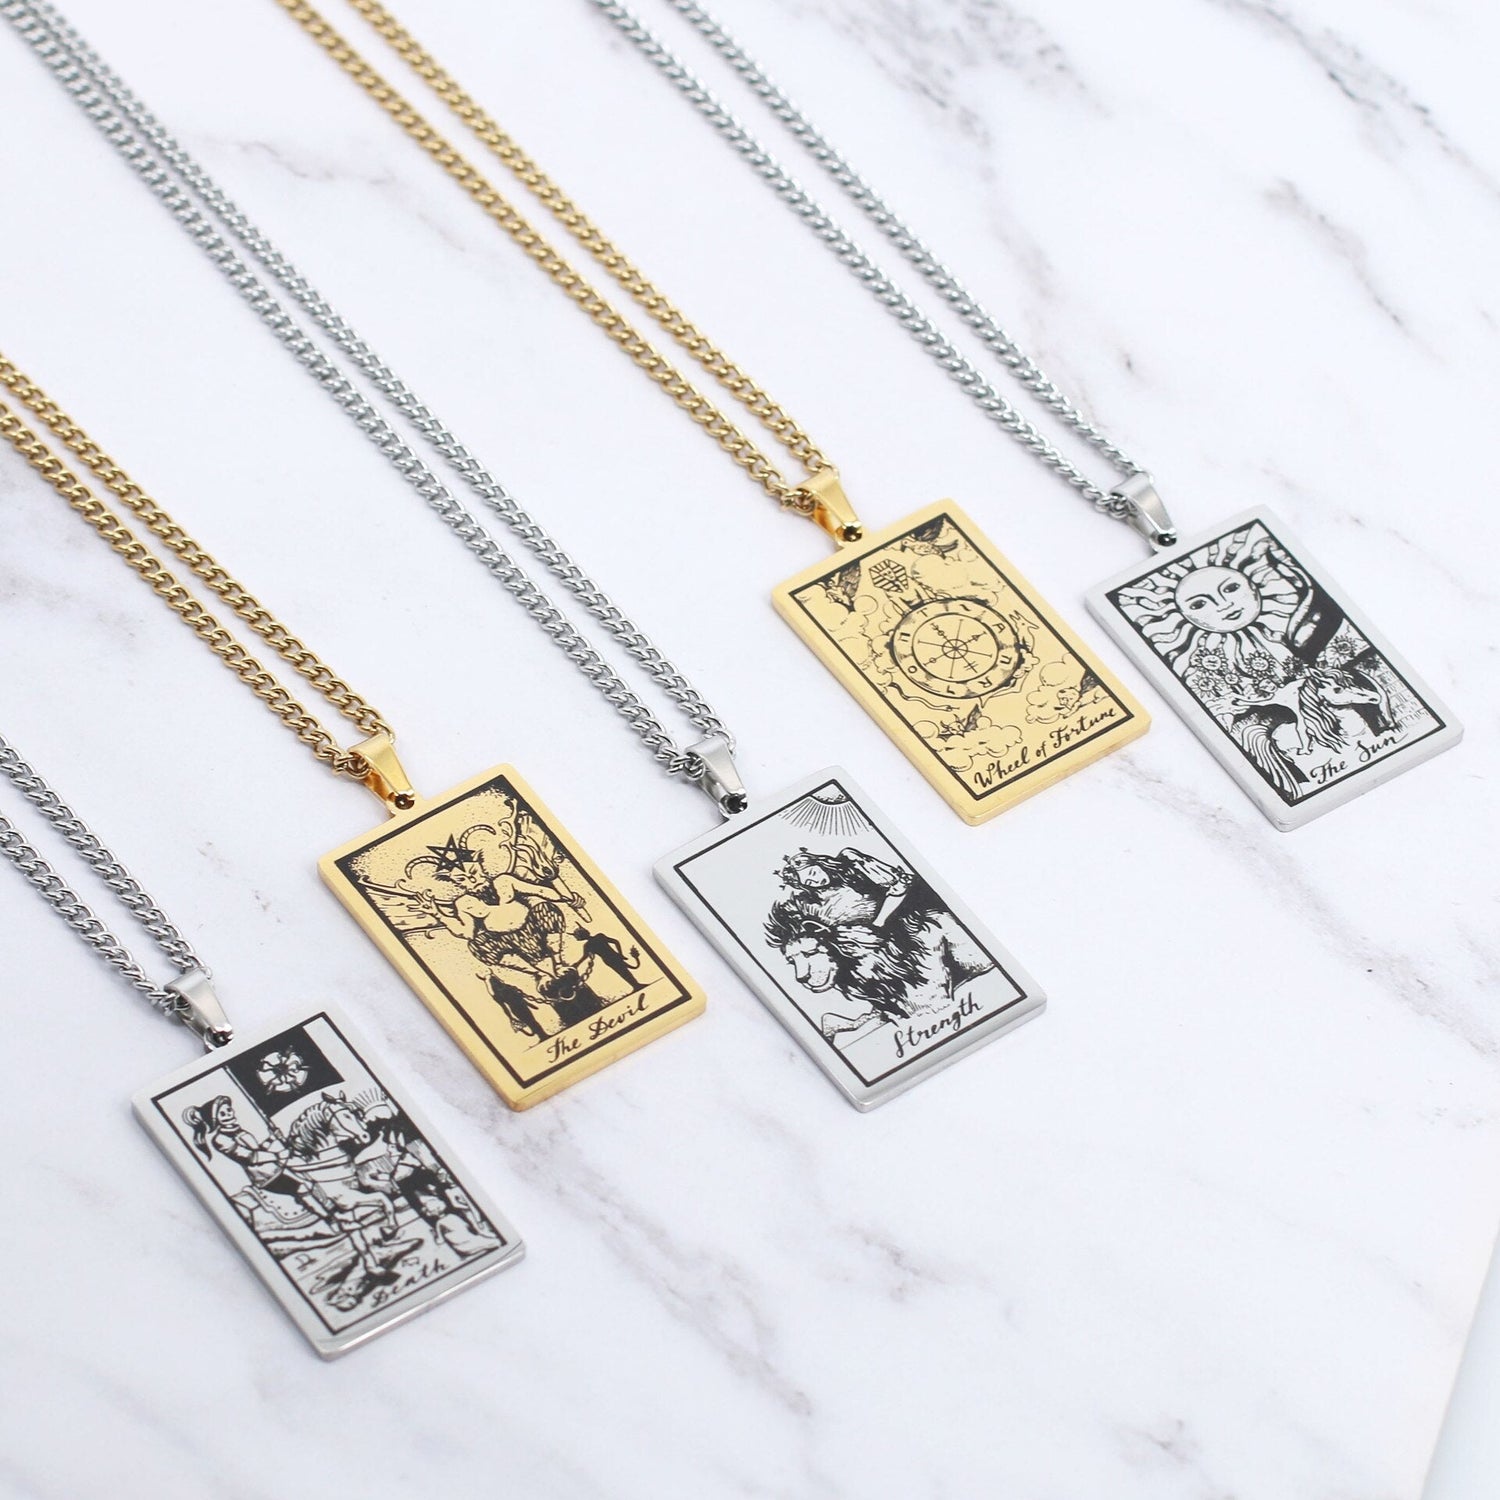 Tarot Cards Necklace, Tarot Pendant, 18K Gold Necklace, Gothic Dainty Minimalist Jewelry, Punk Delicate Handmade for Women, Gift for Her